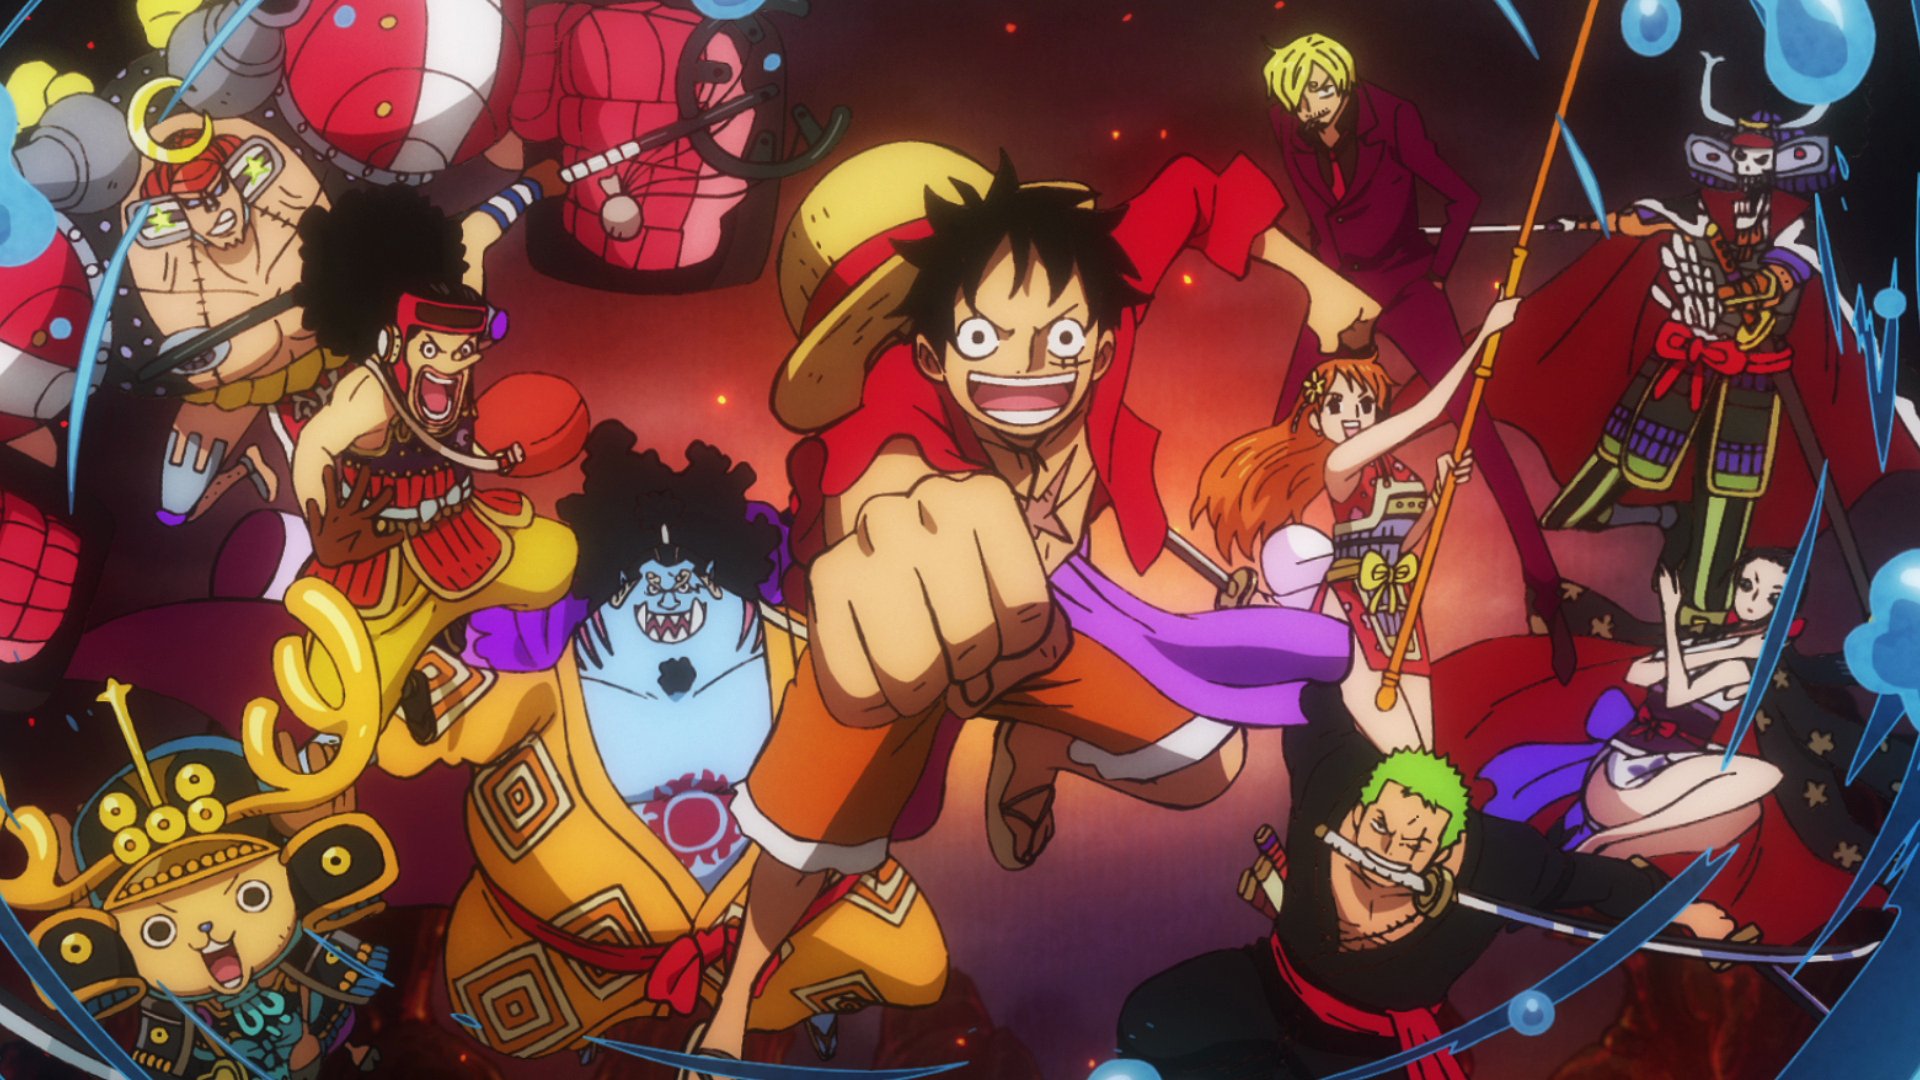 Toei Animation ten Straw Hat Pirates now accounted for in the Opening and new Eyecatcher for One Piece!